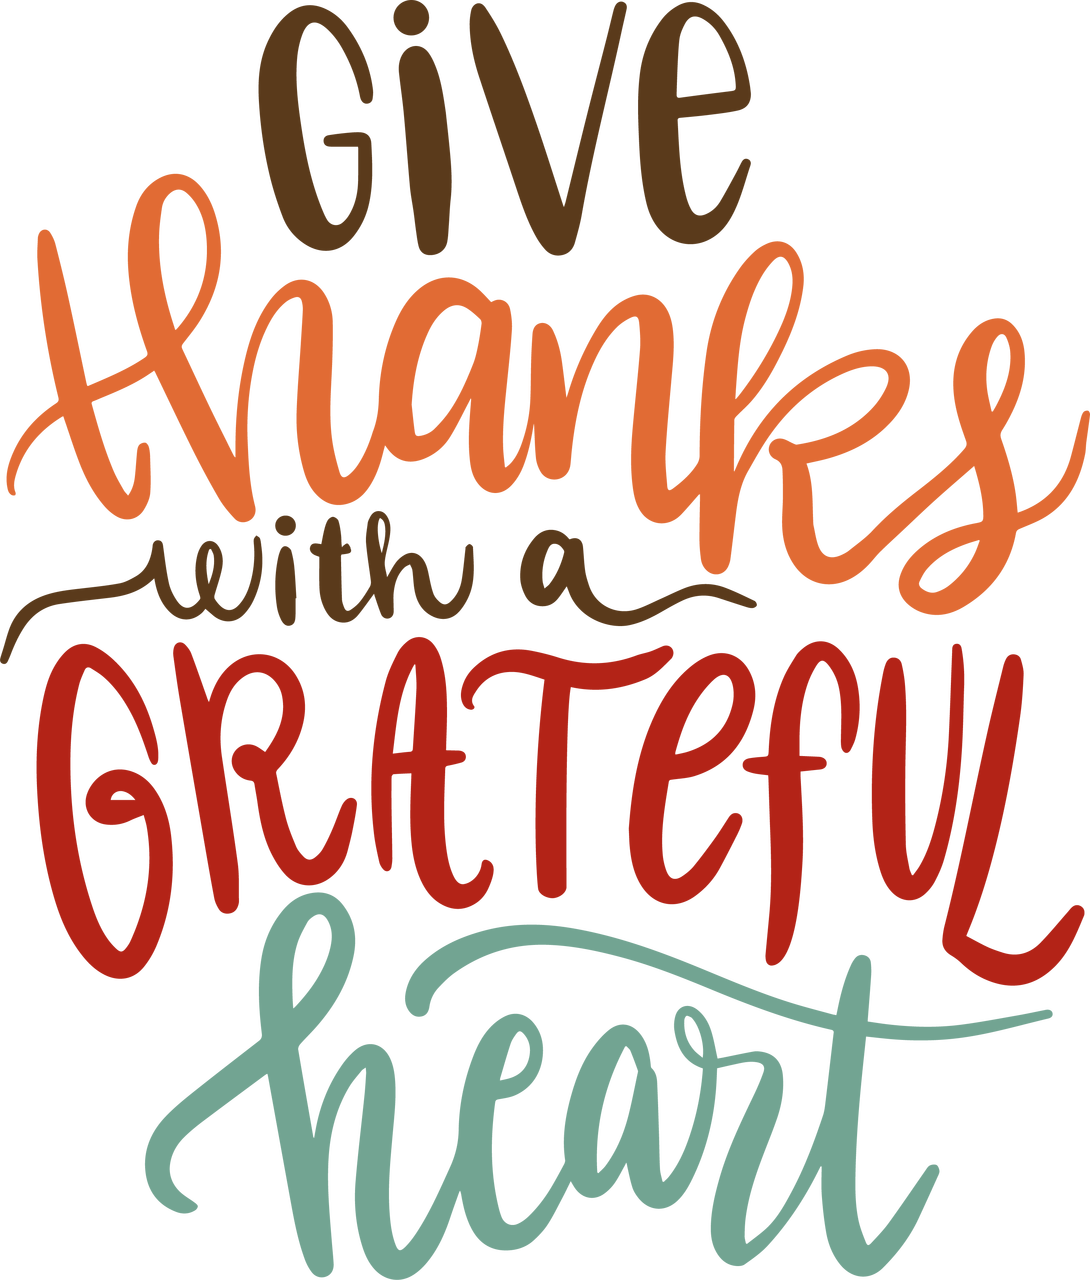 Image - Give Thanks With A Grateful Heart Script (1090x1280)